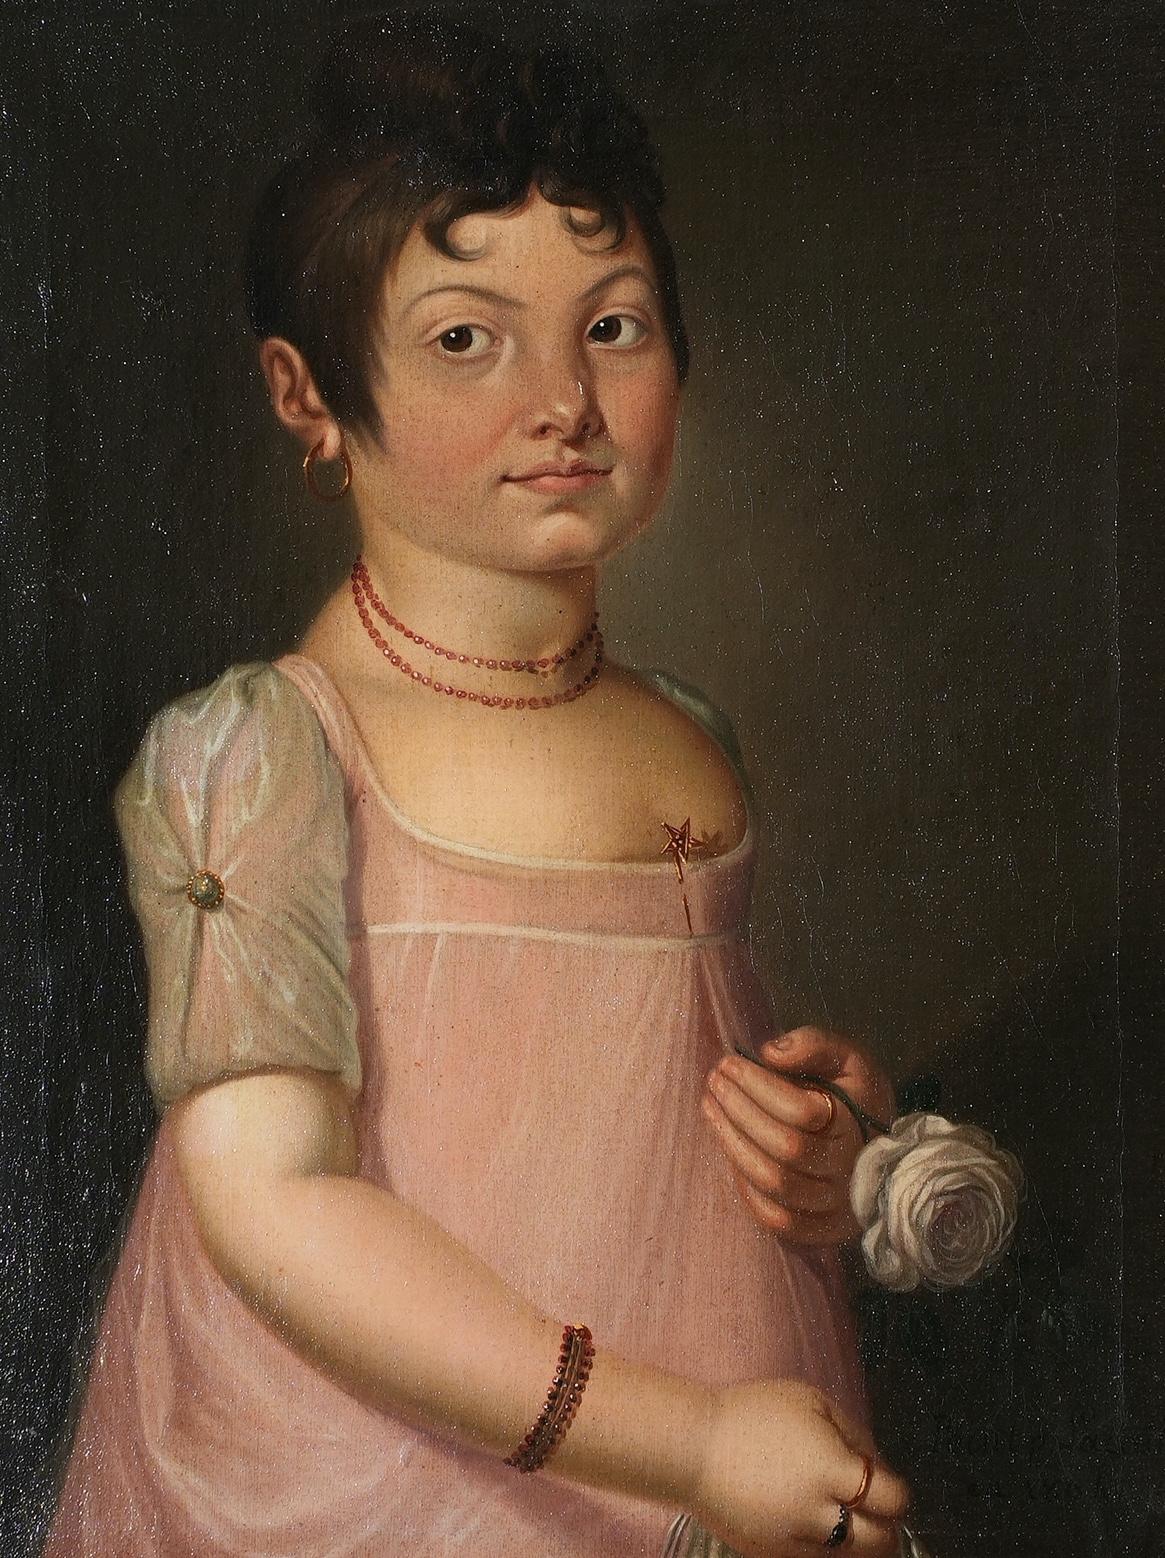 Neoclassicism saturates this droll portrait of a French girl c. 1800: the high-waisted dress, the antique hairstyle 